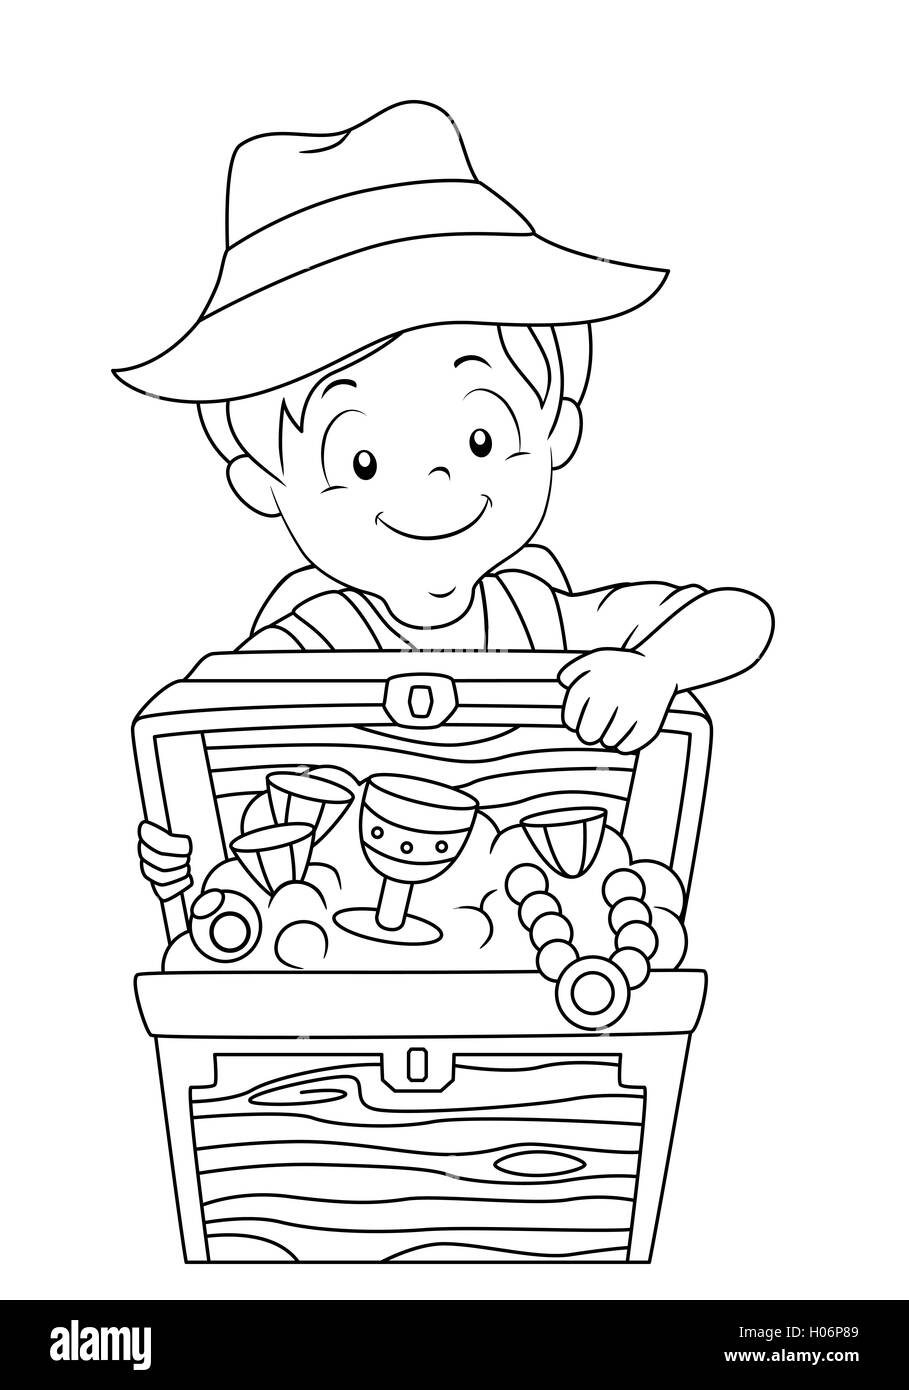 Black and White Coloring Page Illustration of a Boy Opening a Treasure Chest Stock Photo